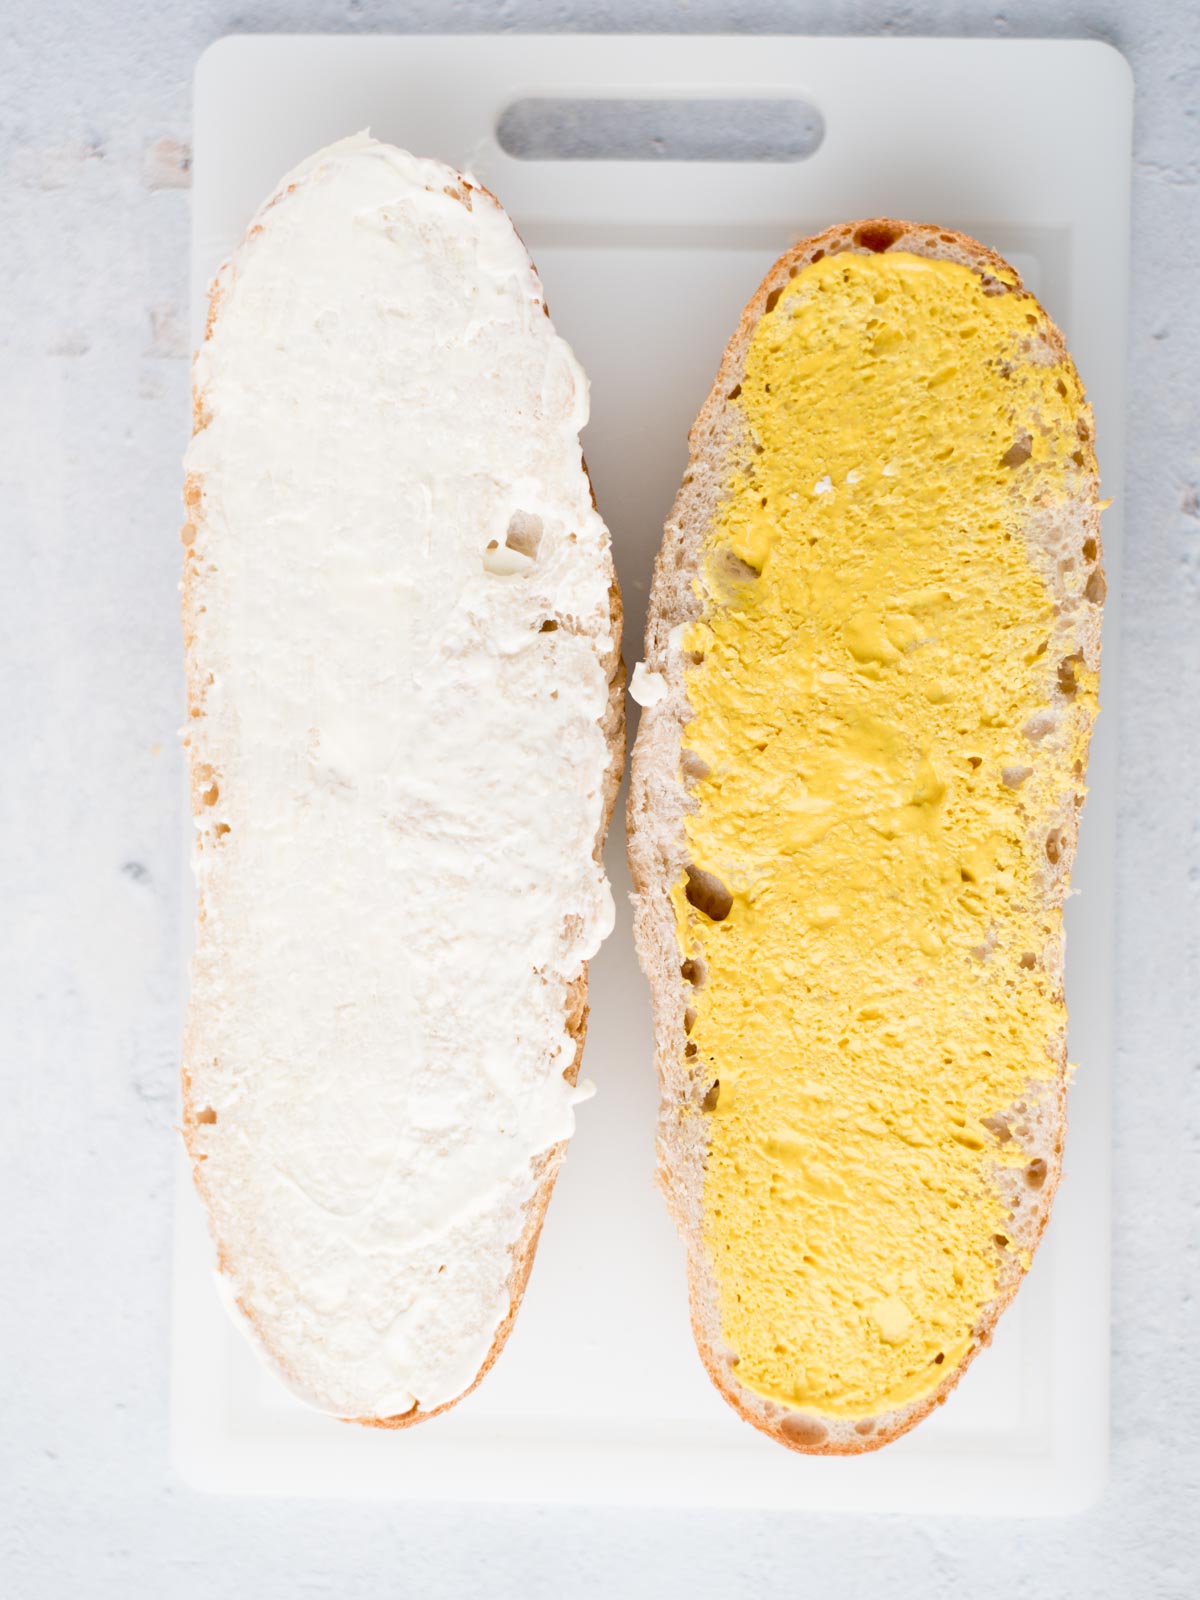 halves of a french bread loaf. One is covered in mayo and the other is covered in mustard.